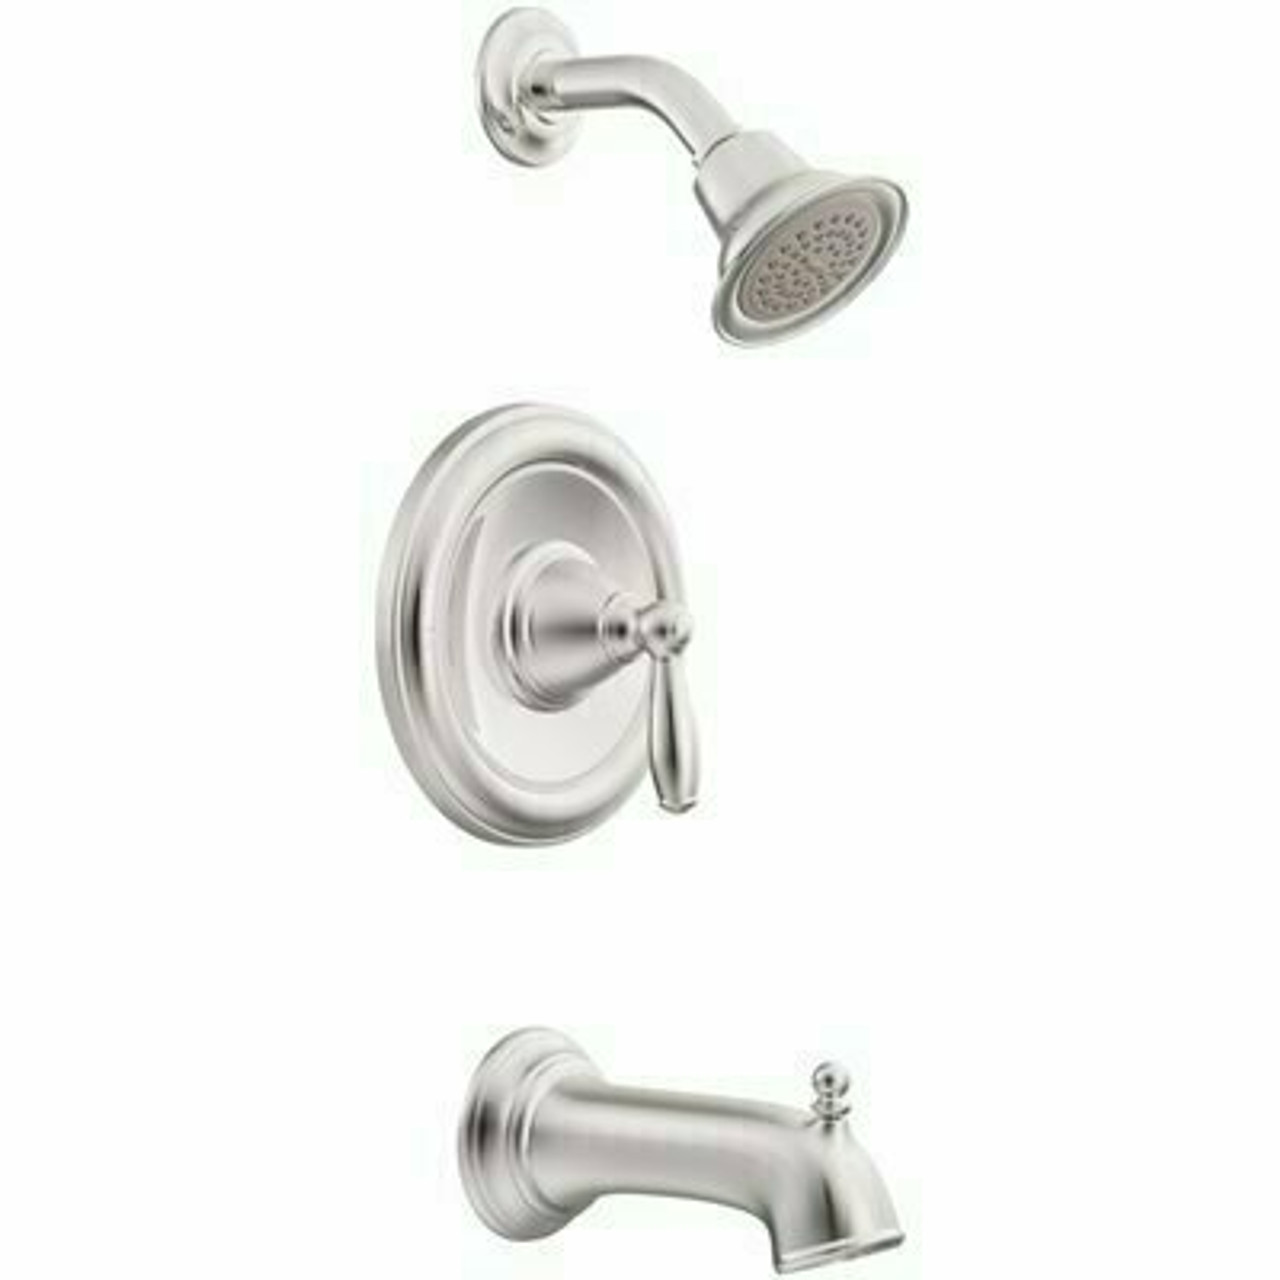 Moen Brantford Single-Handle 1-Spray Posi-Temp Tub And Shower Faucet Trim Kit In Chrome (Valve Not Included)